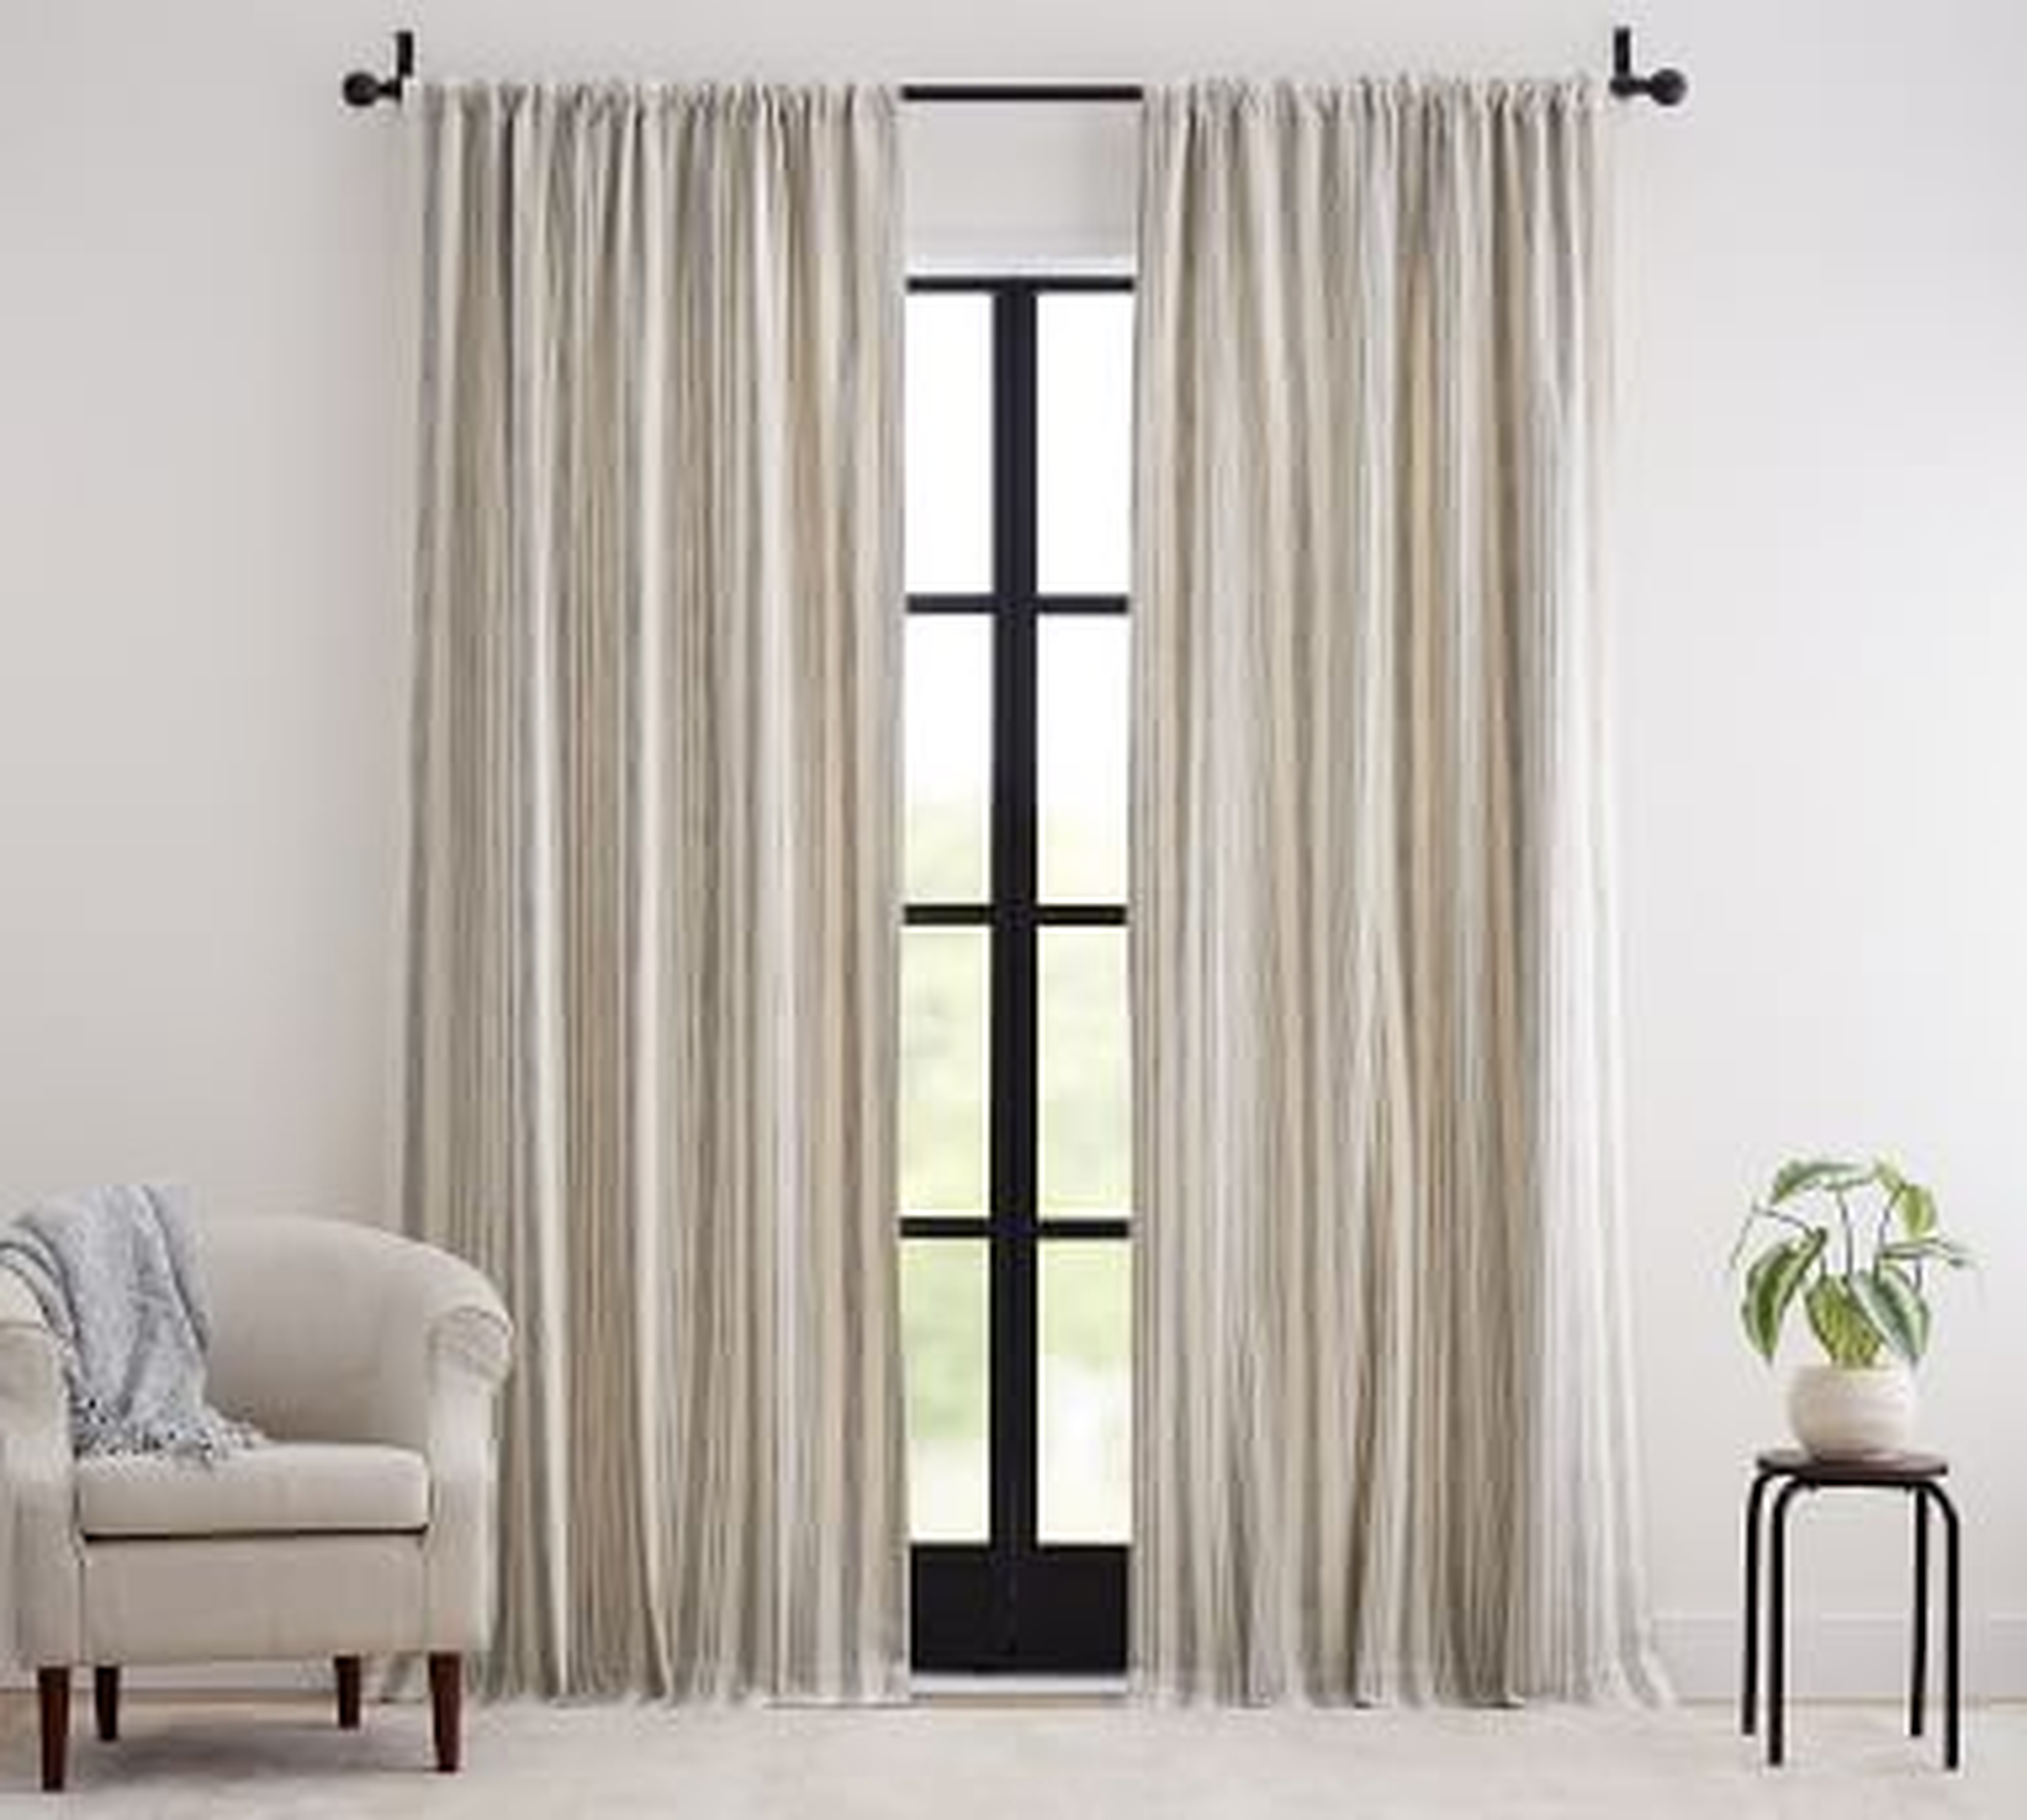 Hawthorn Striped Cotton Curtain, 50 x 96", Charcoal - Pottery Barn